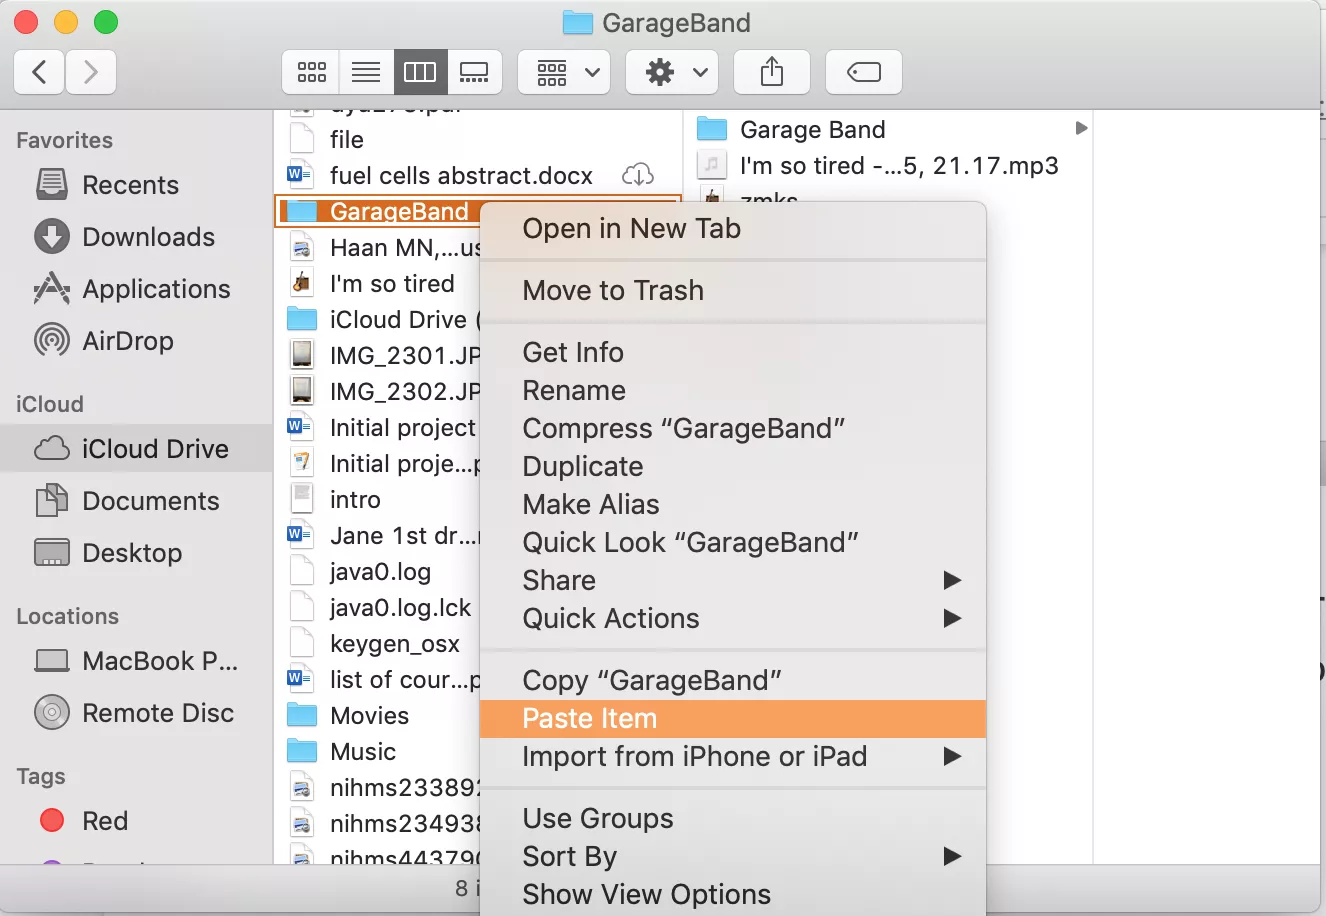 How to Copy and Paste on a Mac